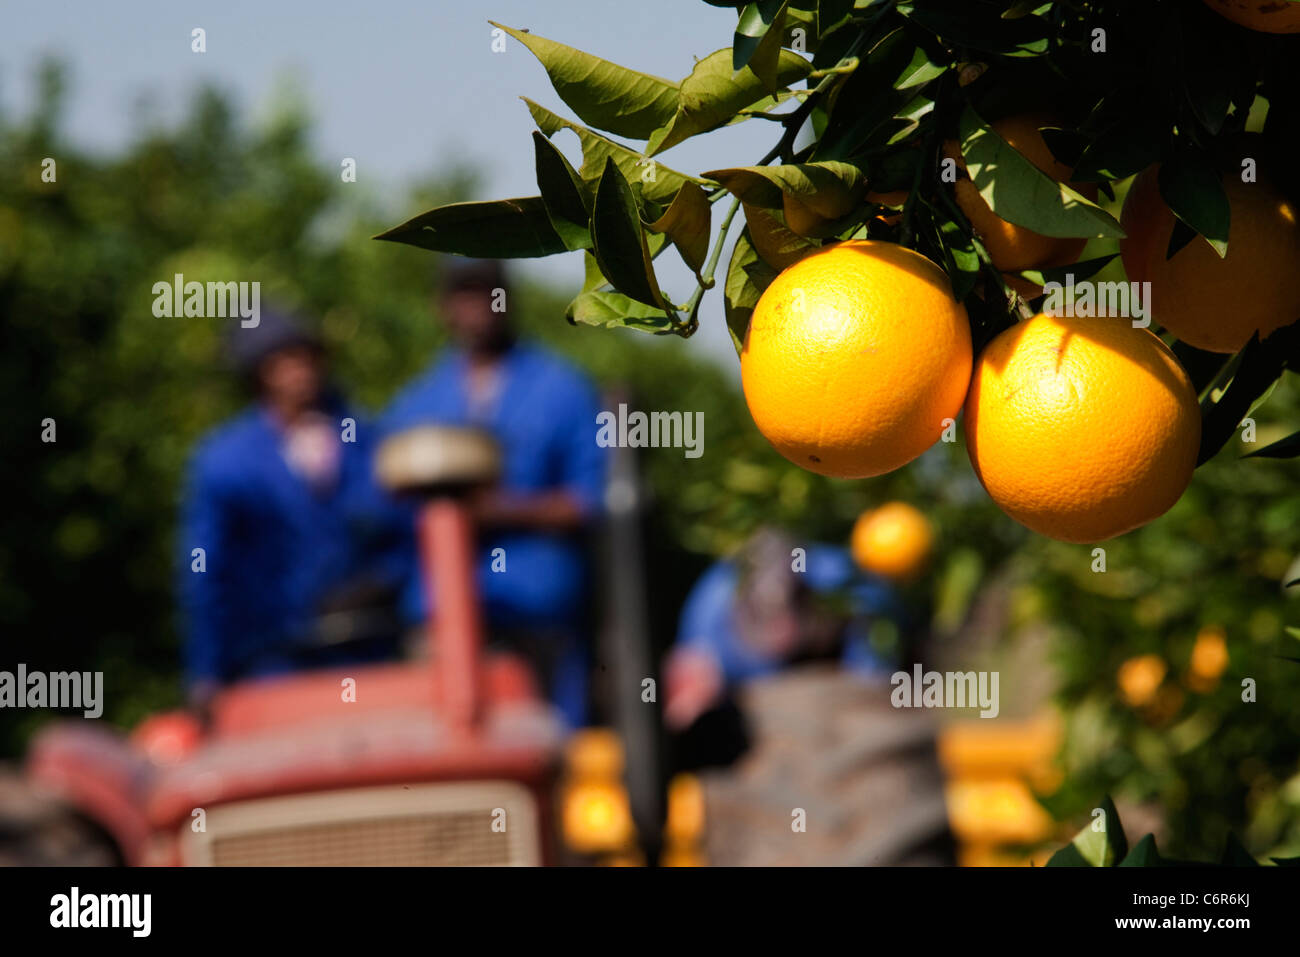 Oranges hanging from a branch with an out of focus tractor and labourers in the background Stock Photo